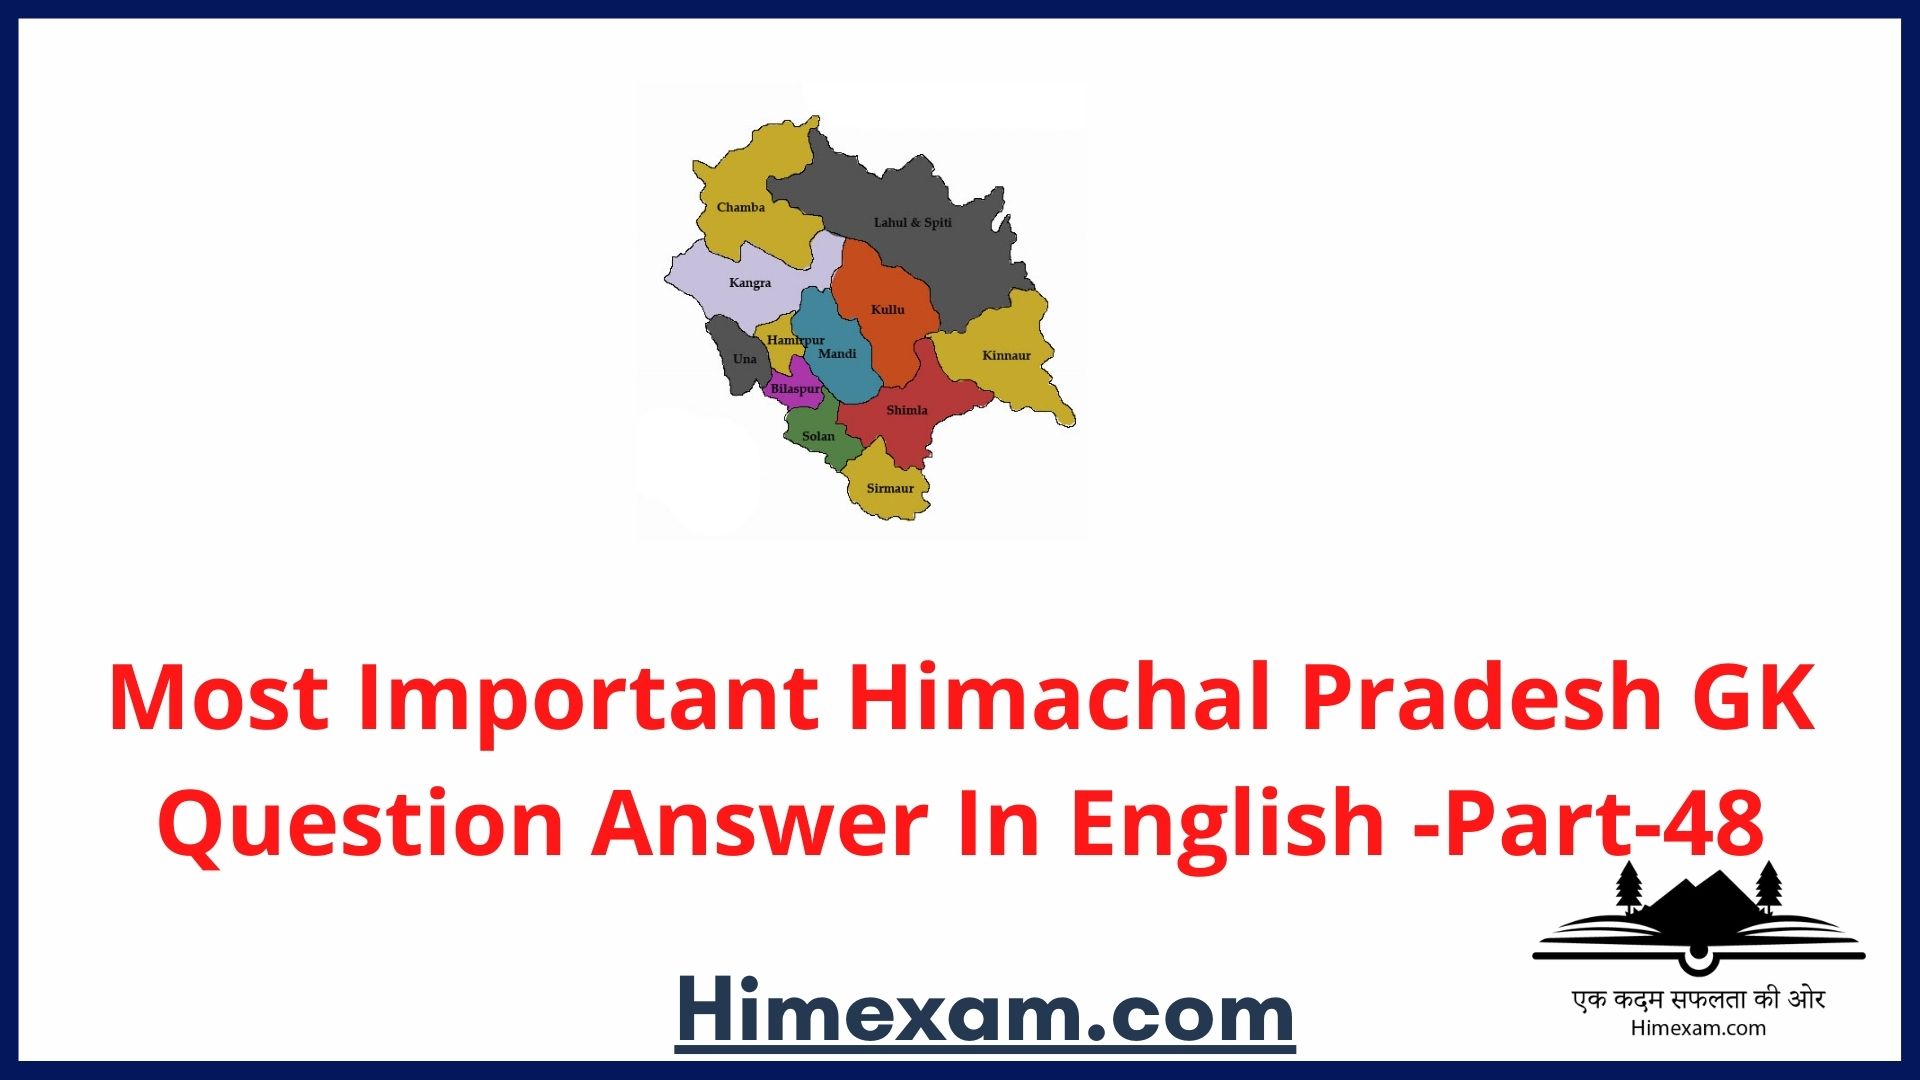 Most Important Himachal Pradesh GK Question Answer In English -Part-48